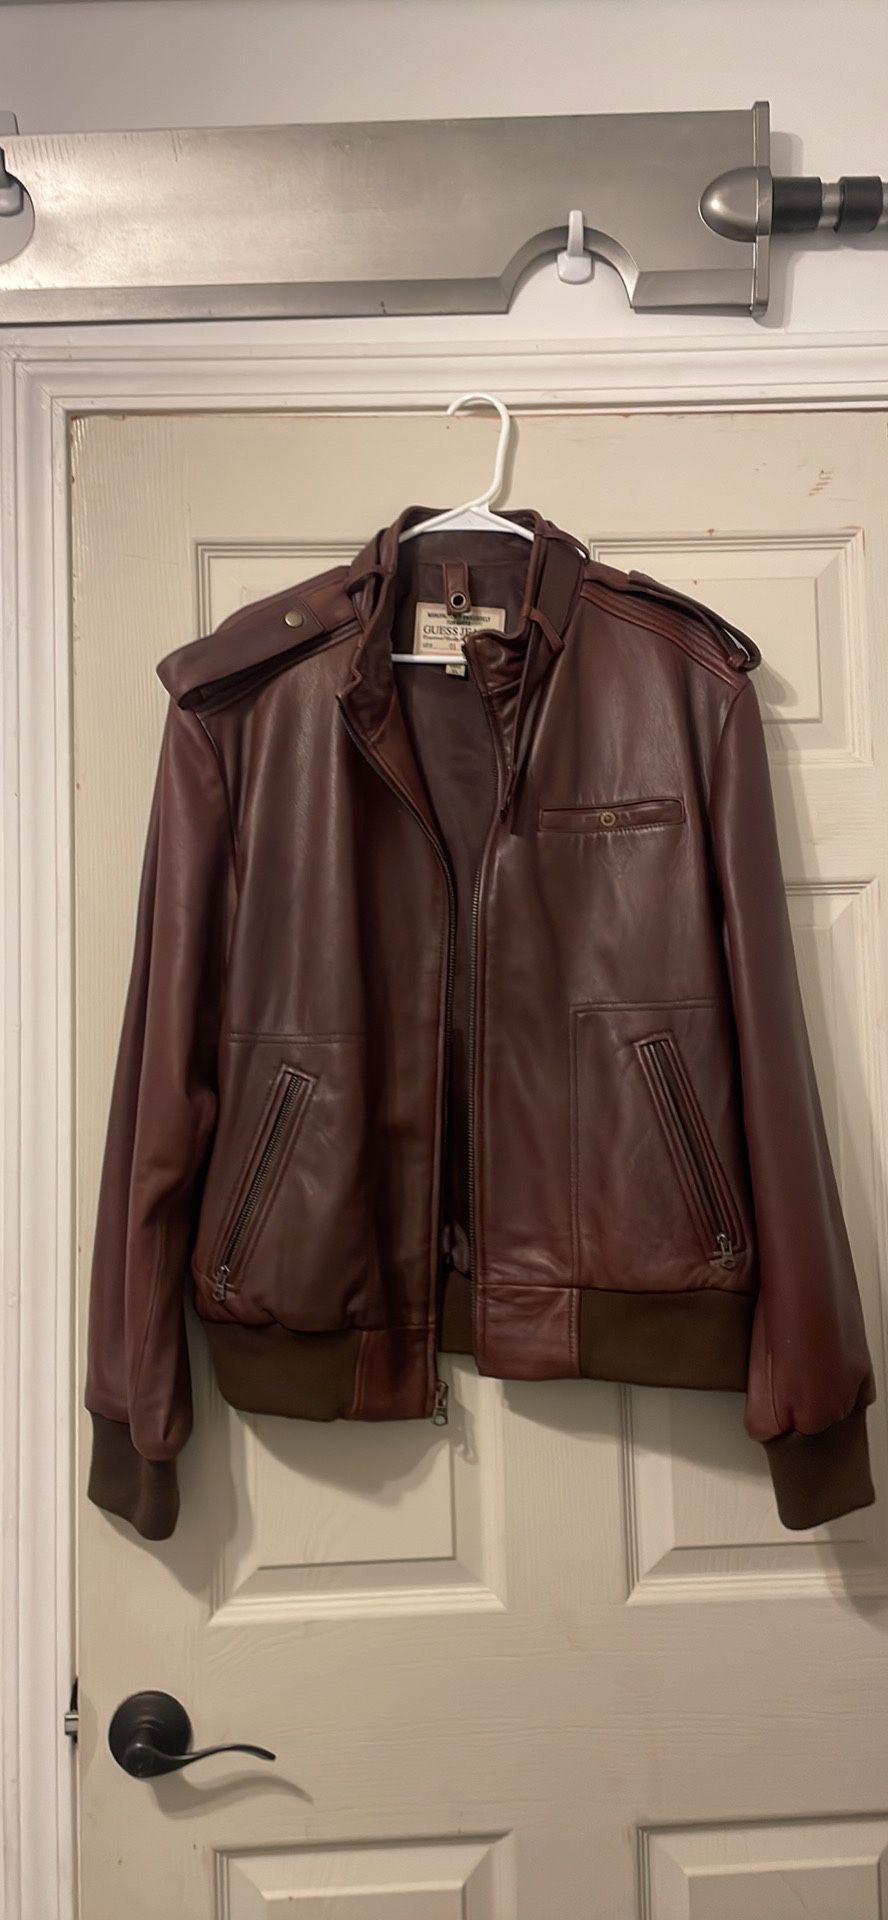 Guess leather jacket